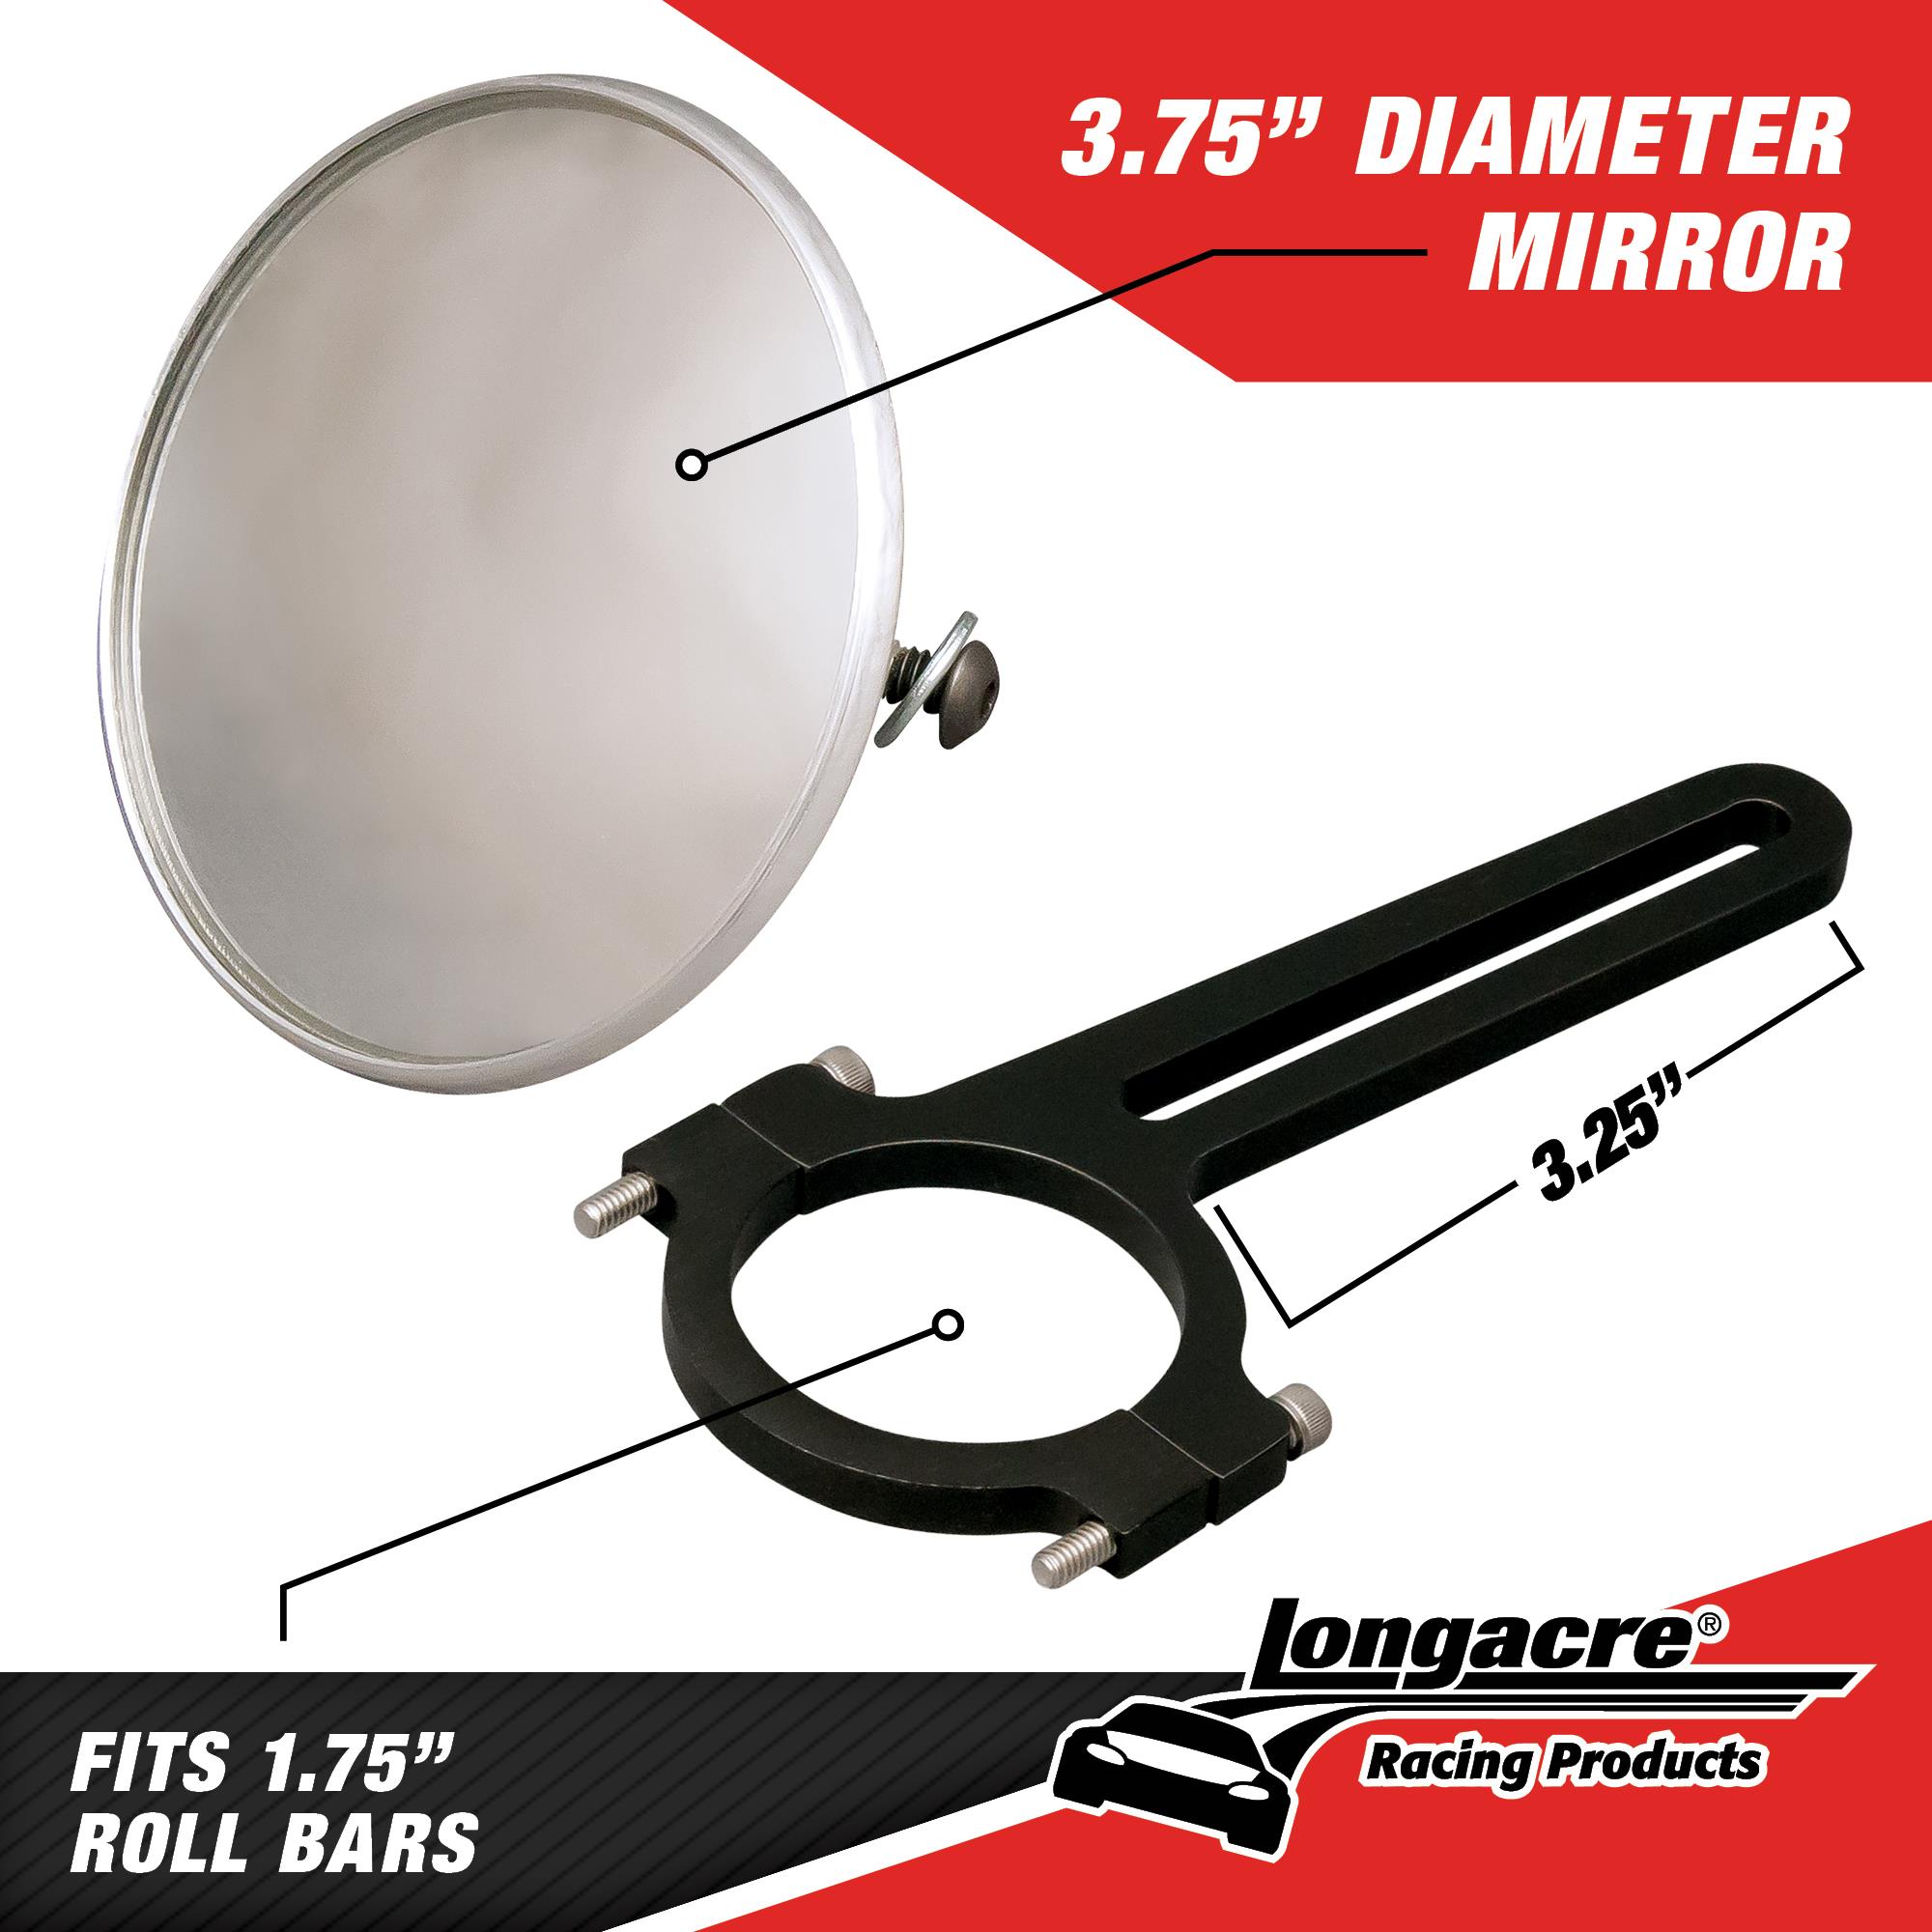 Spot Mirrors - Clamp On